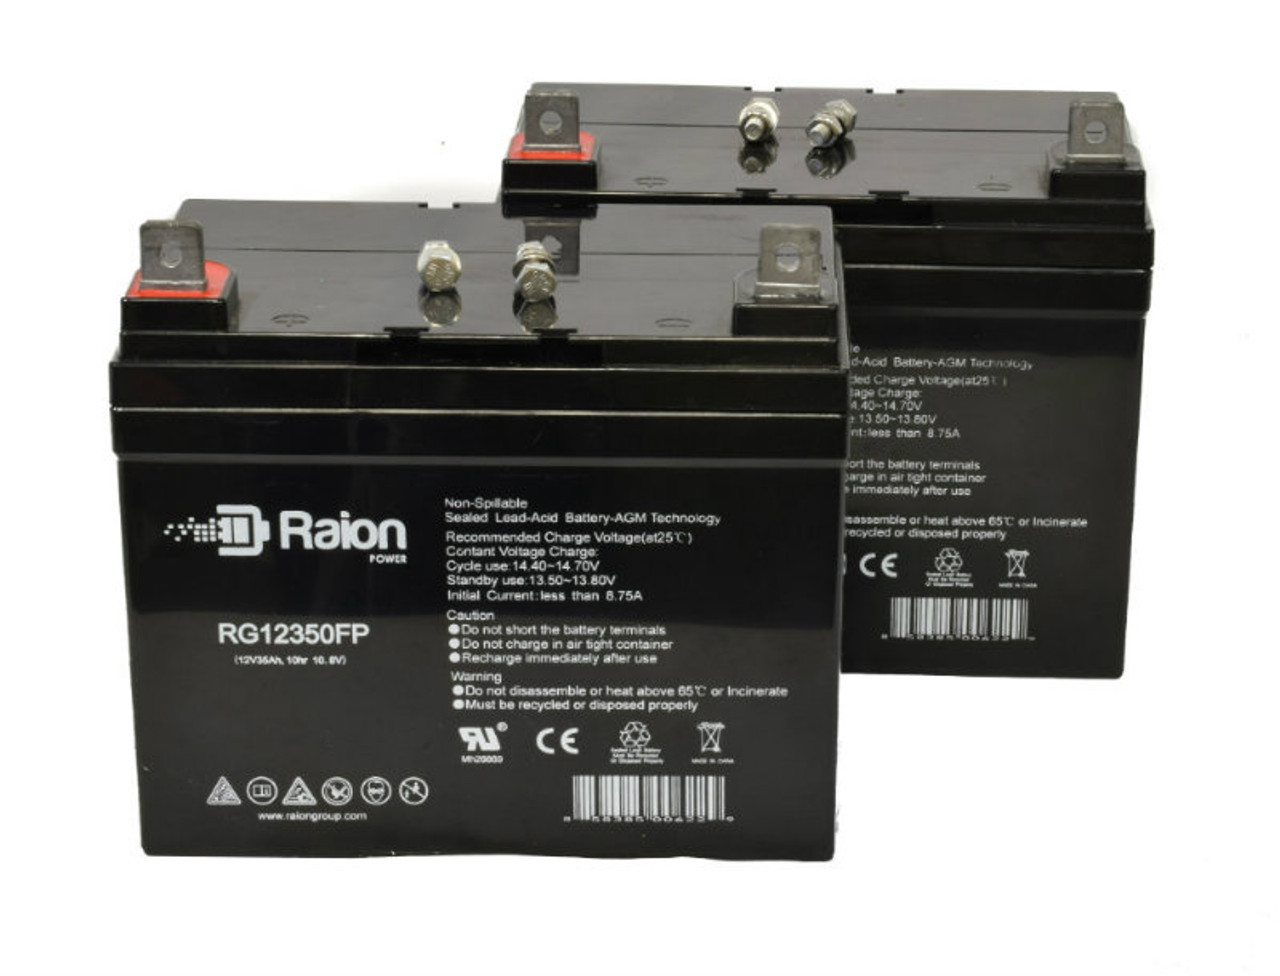 Raion Power Replacement 12V 35Ah Group U1 Battery for Cellpower CPL 33-12 - 2 Pack